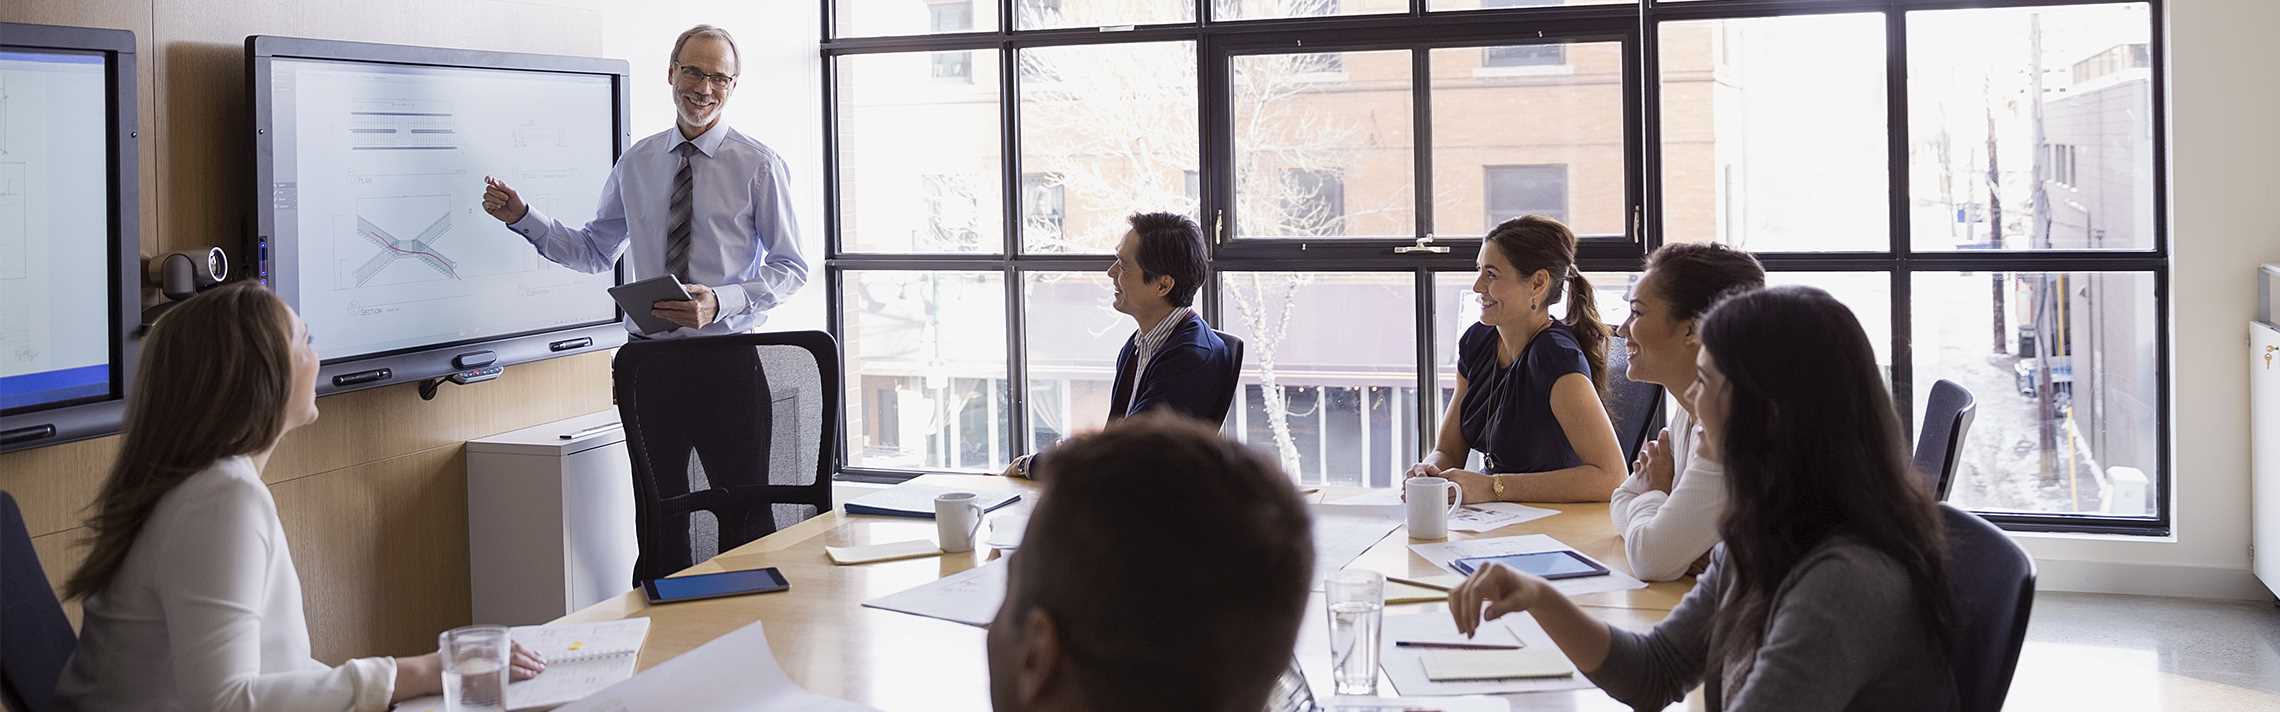 Businessman leading a meeting at a monitor in conference room.